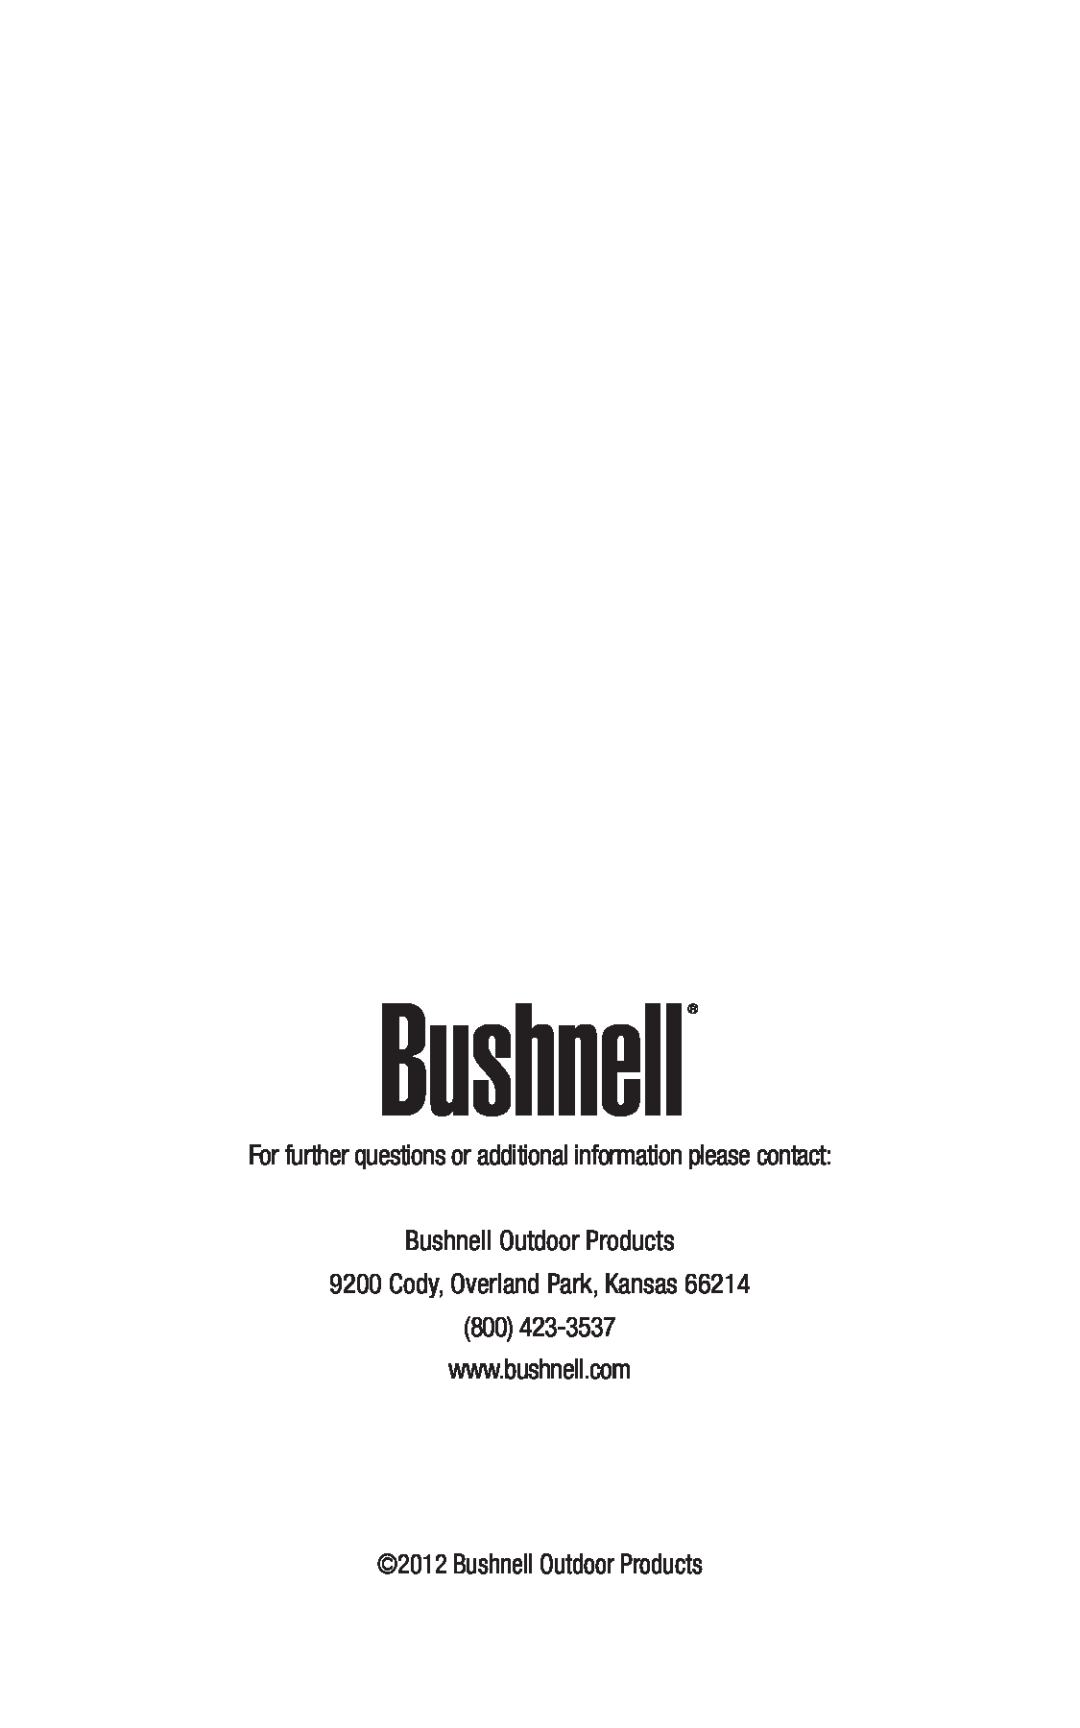 Bushnell 191144 For further questions or additional information please contact, Bushnell Outdoor Products 